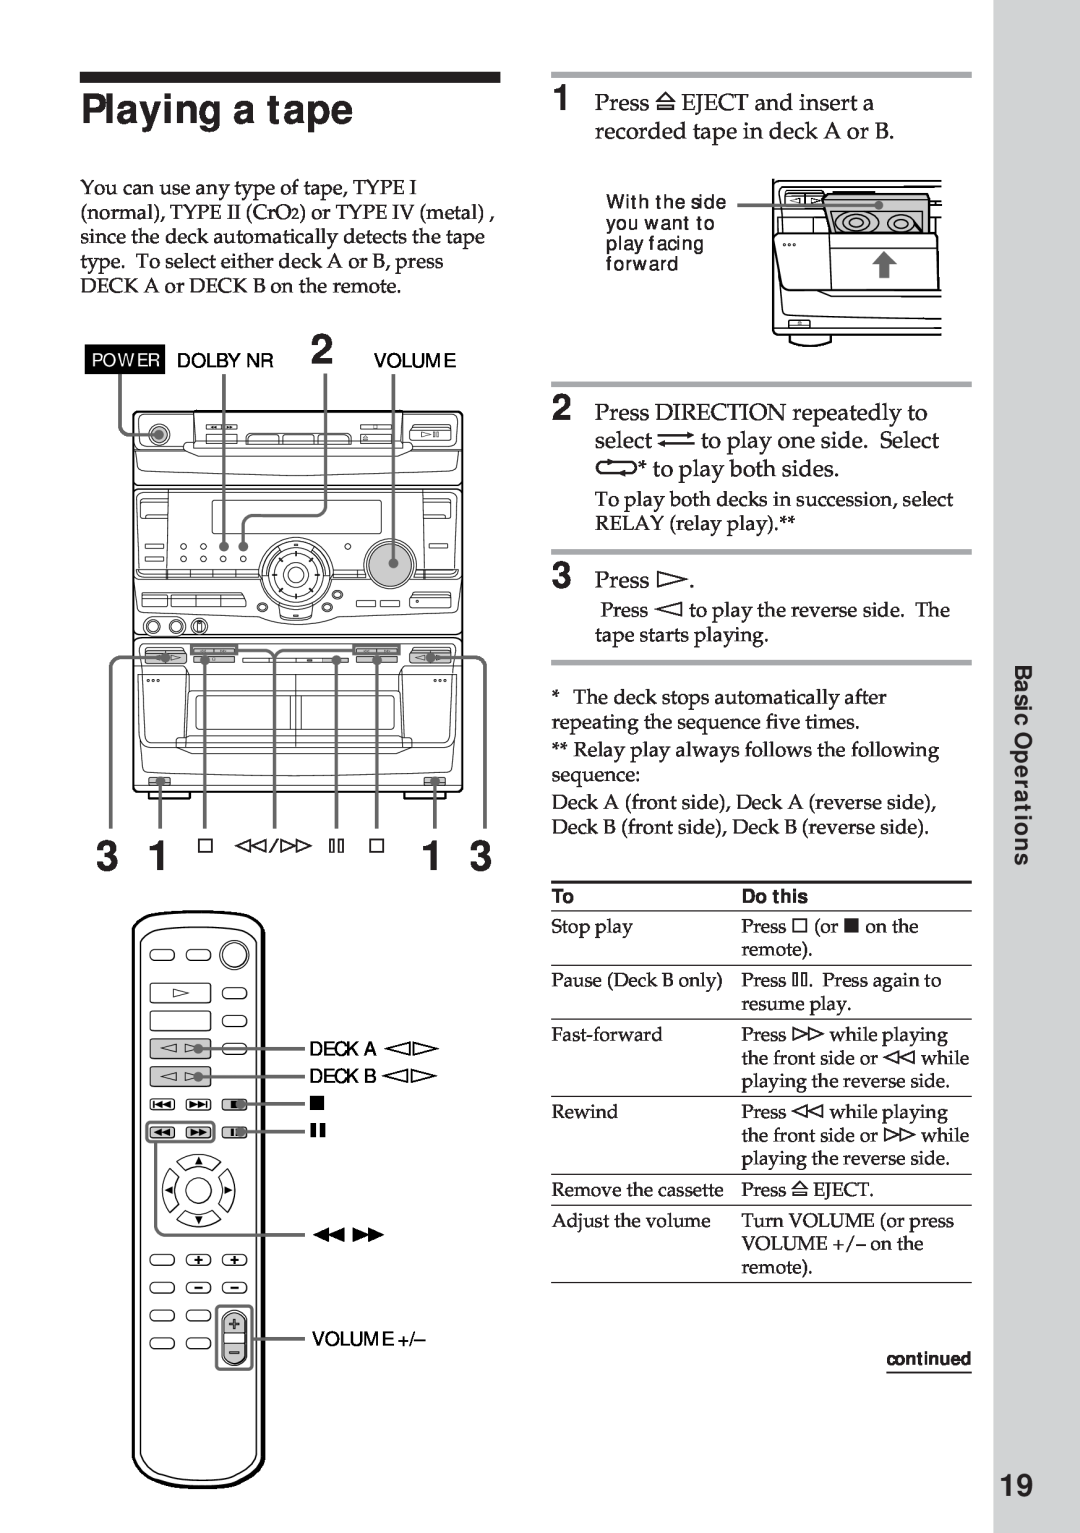 Sony MHC-RX100AV operating instructions Playing a tape, Basic Operations 